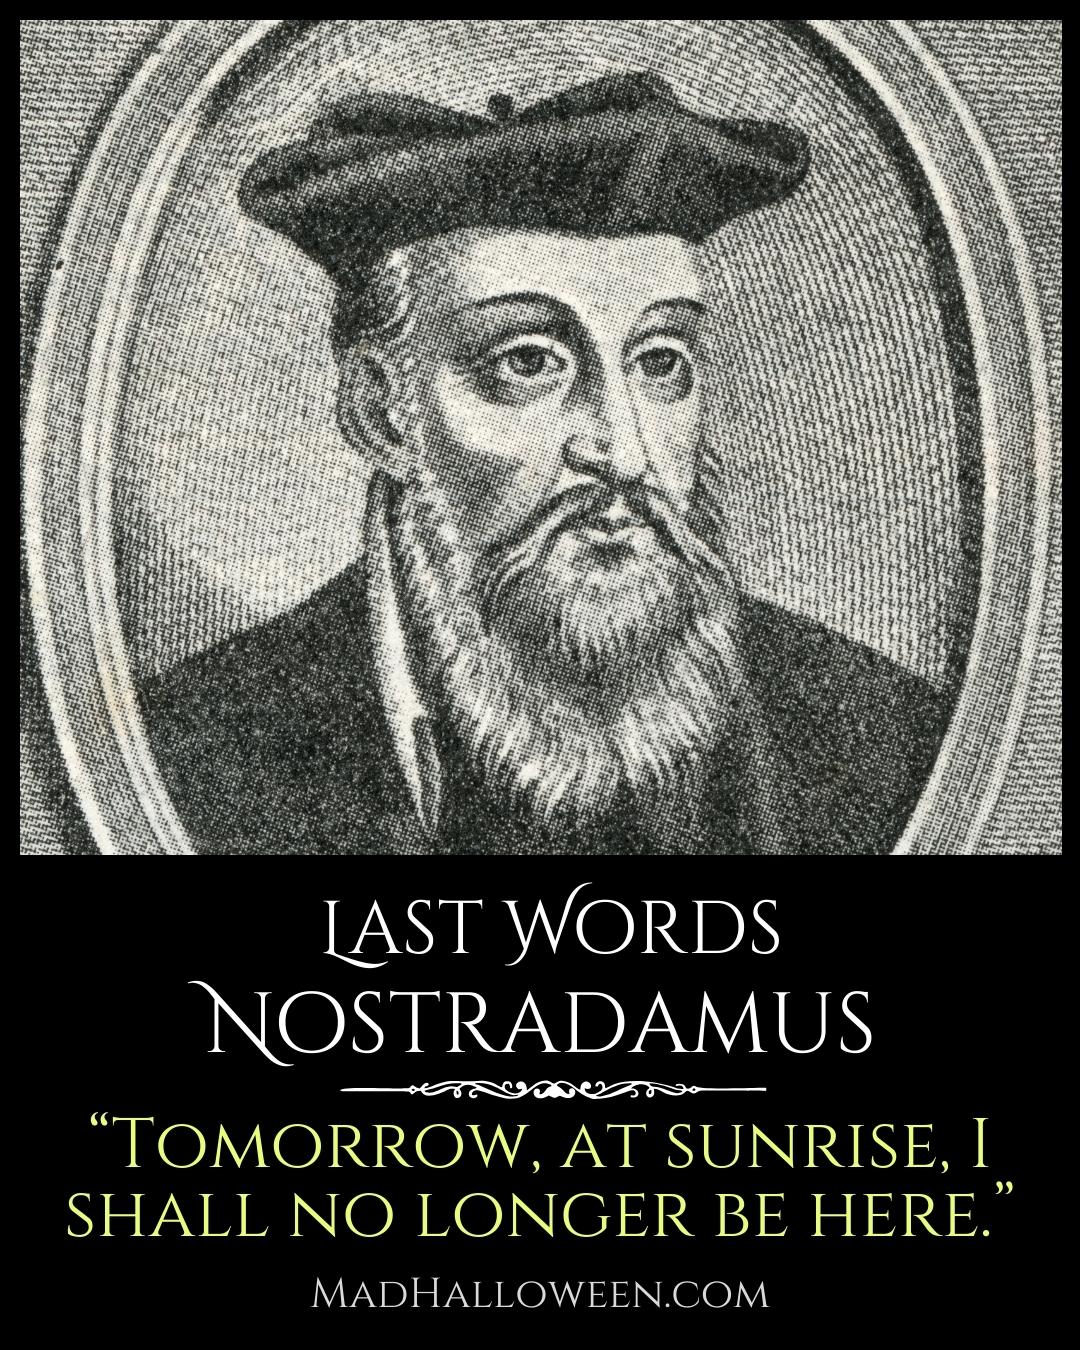 Famous Last Words Quotes of the Departed - Nostradamus - Mad Halloween